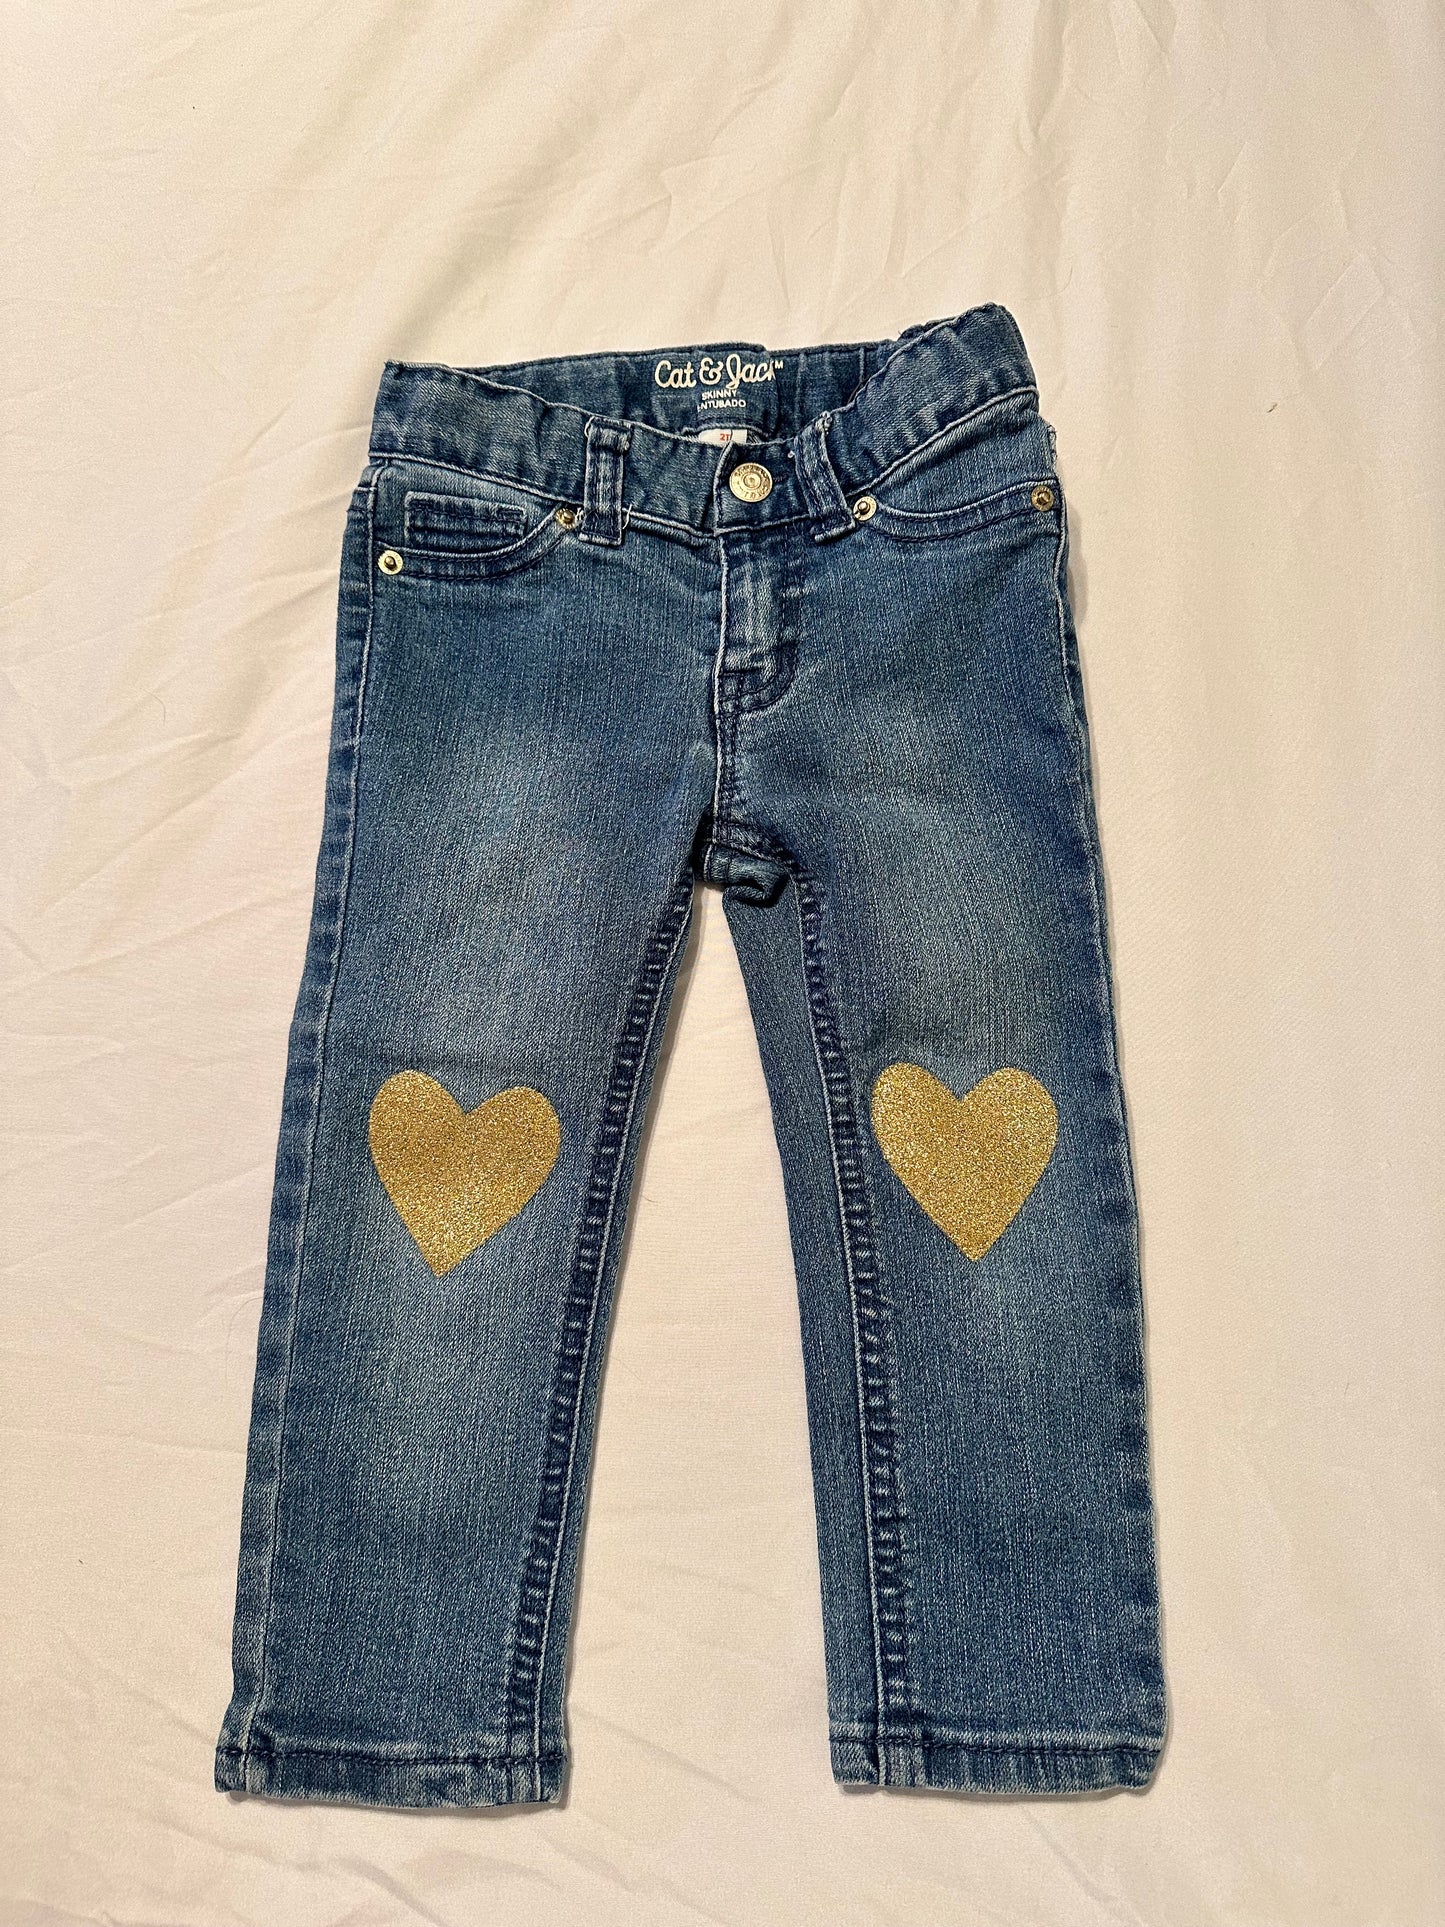 Girls skinny jeans with gold hearts, Cat and Jack, 24 months